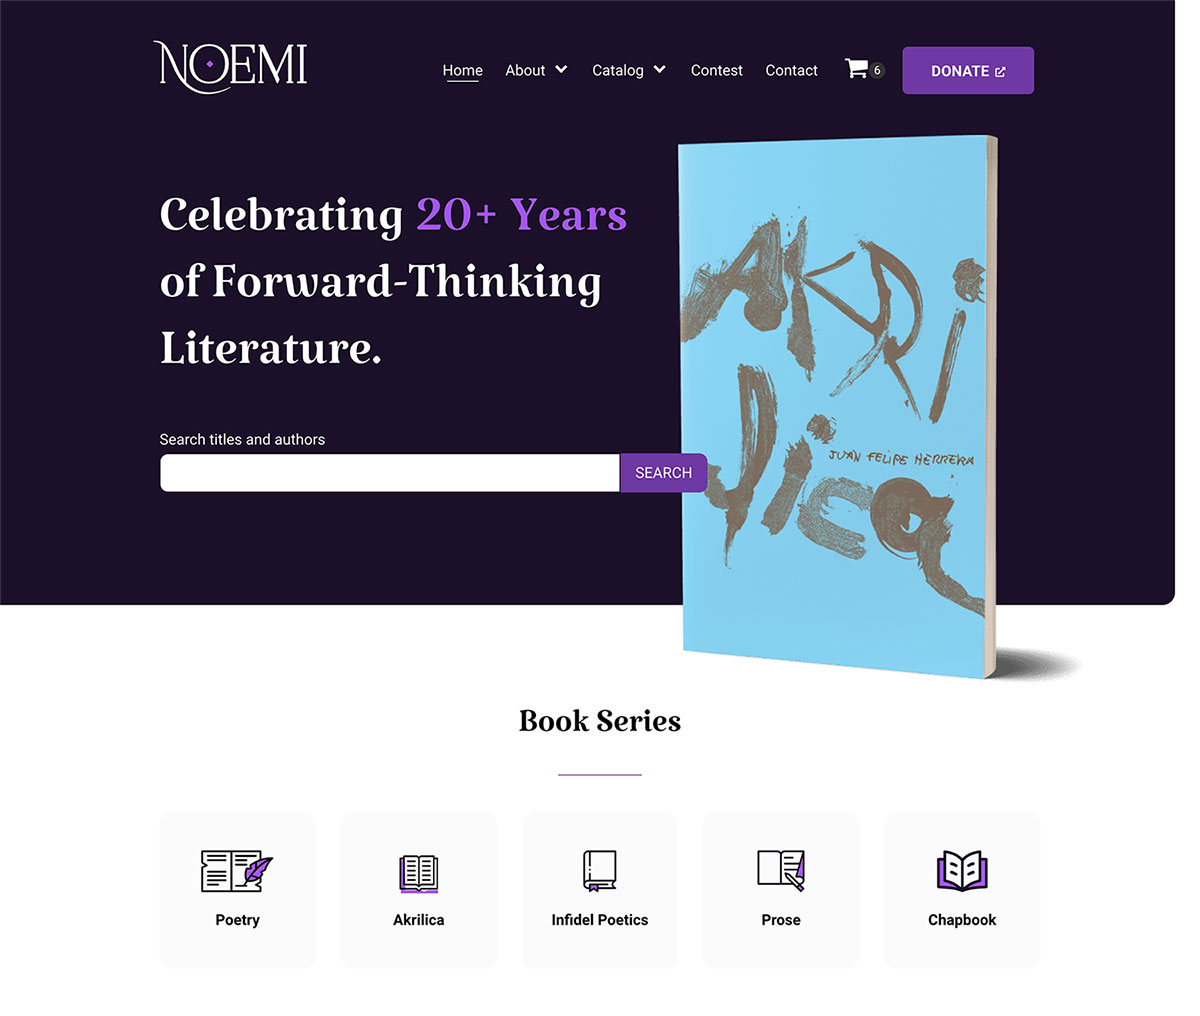 Screenshot of Noemi Press' home page 'above the fold' section displaying their logo, navigation menu, search bar, book cover, and 5 icons of book categories beneath.